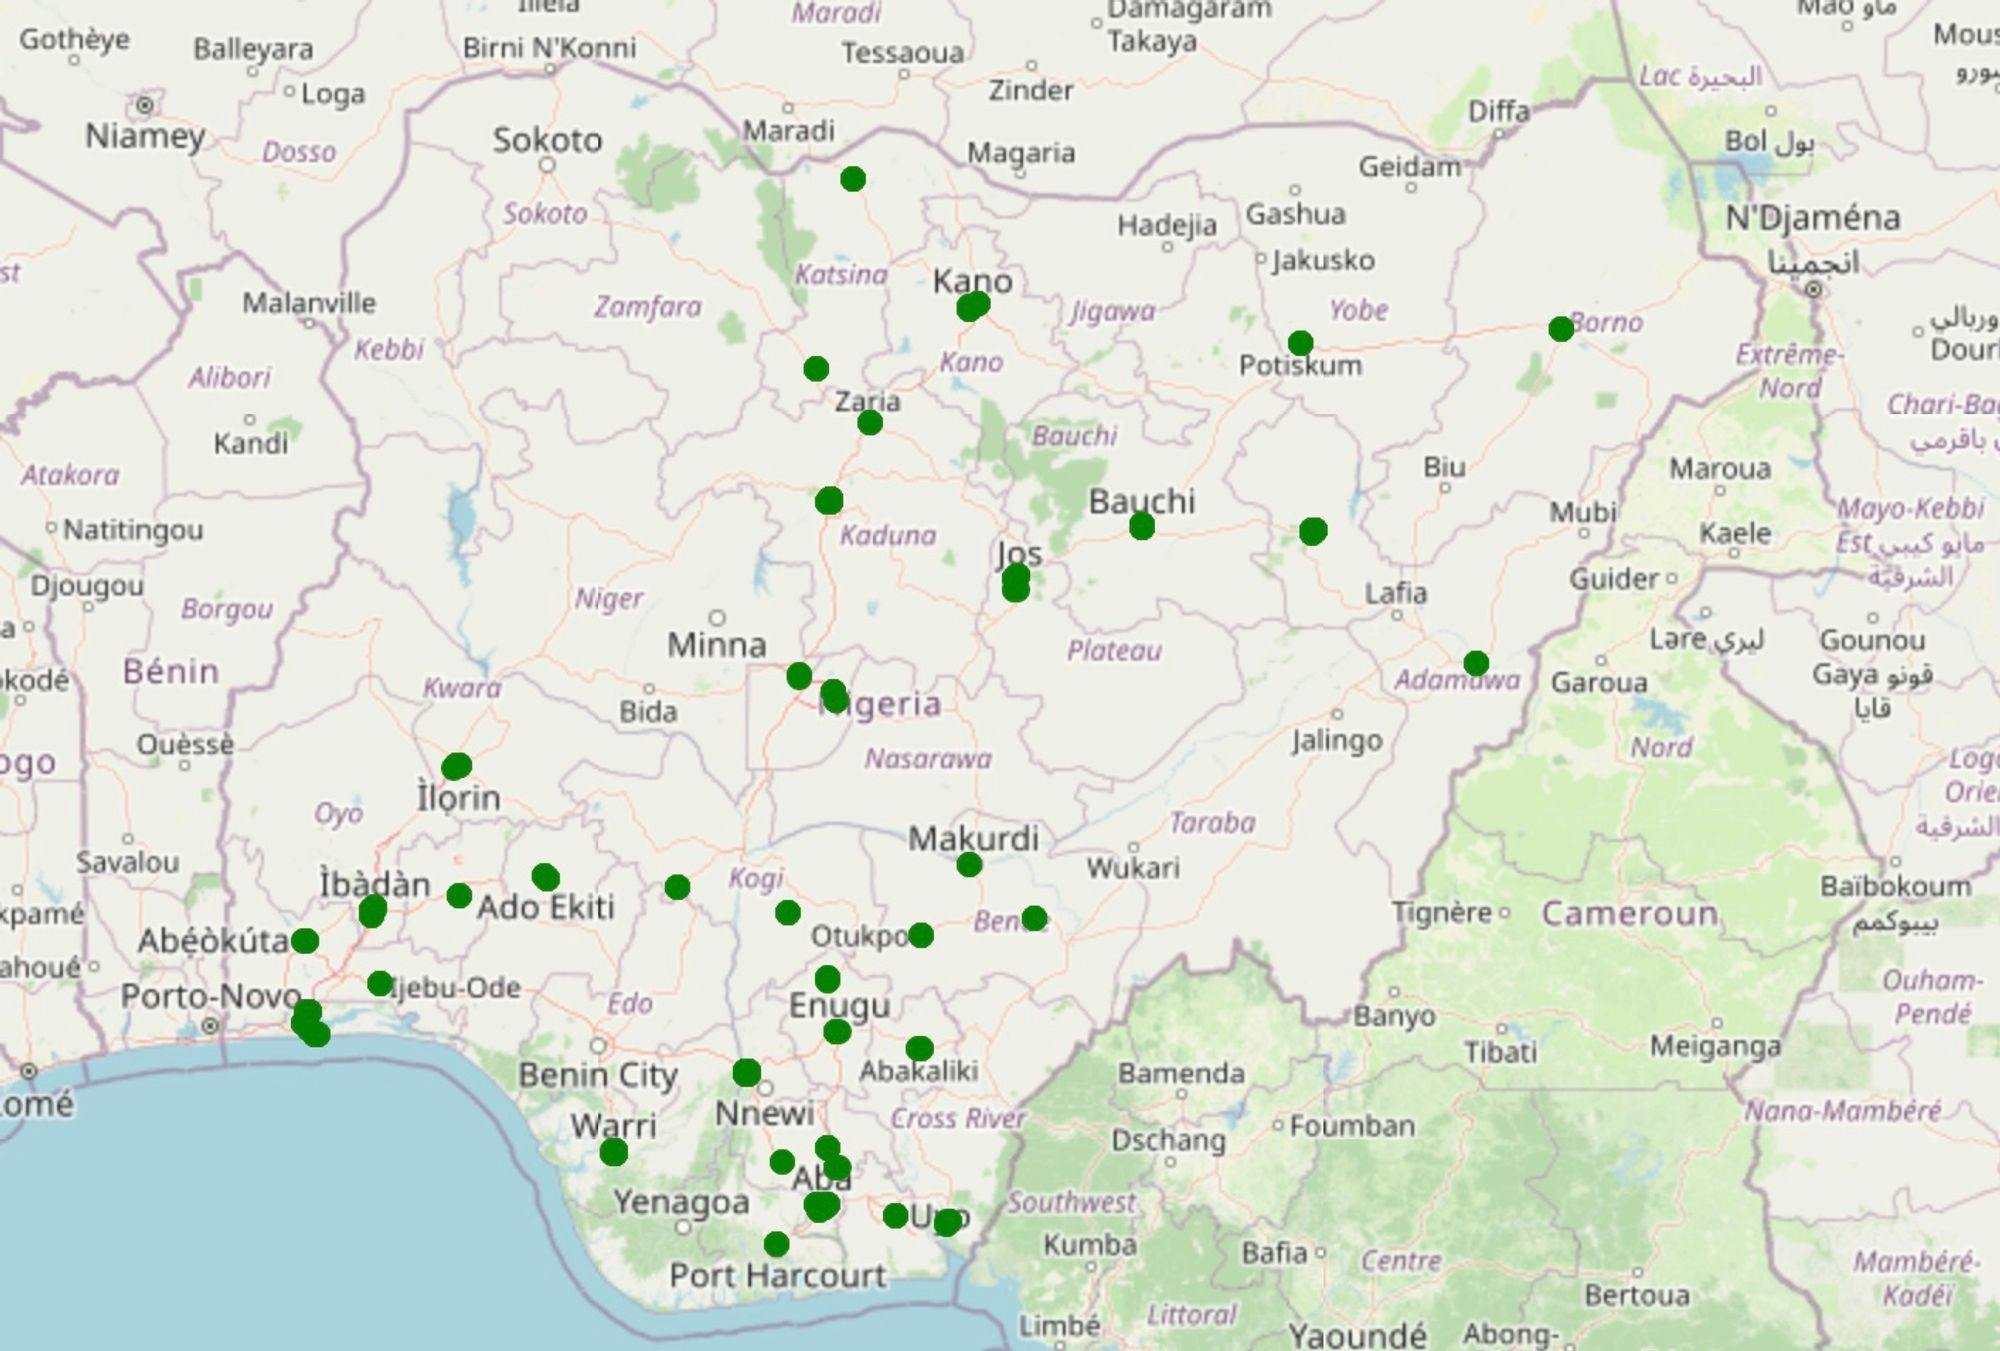 Figure 1: Across Nigeria, 80 markets were selected by Nigeria’s Rural Electrification Agency (REA) for a baseline energy audit survey to inform future energy system investments. nLine sensors were placed in a subset of these markets to remotely monitor power quality and reliability. Note: the locations of some markets overlap with each other at this resolution level.